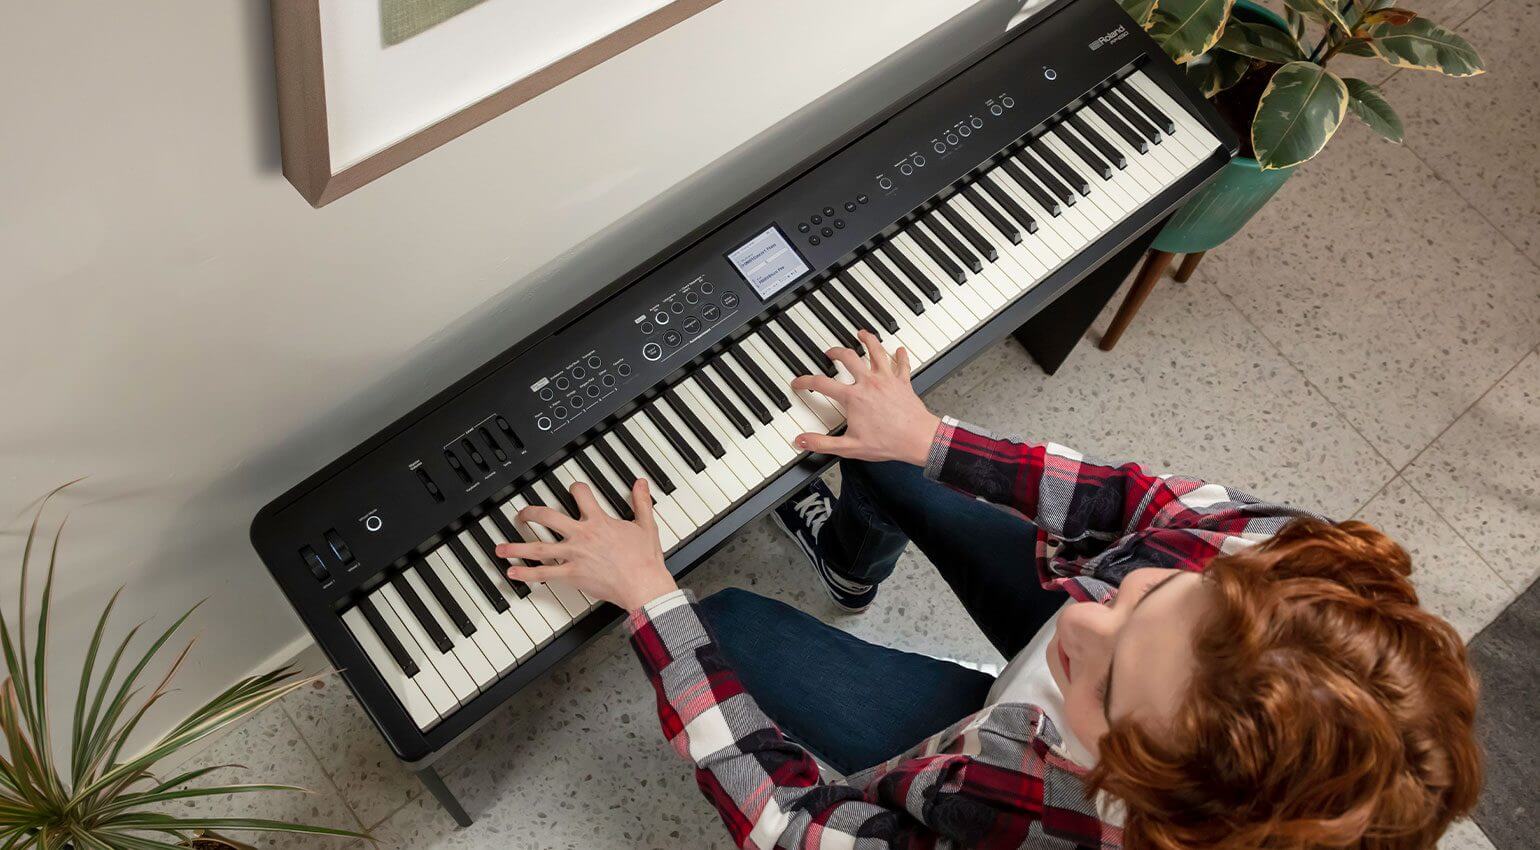 Roland’s FP-E50 digital piano is fully portable and packed with creative features so you can write great  songs quickly